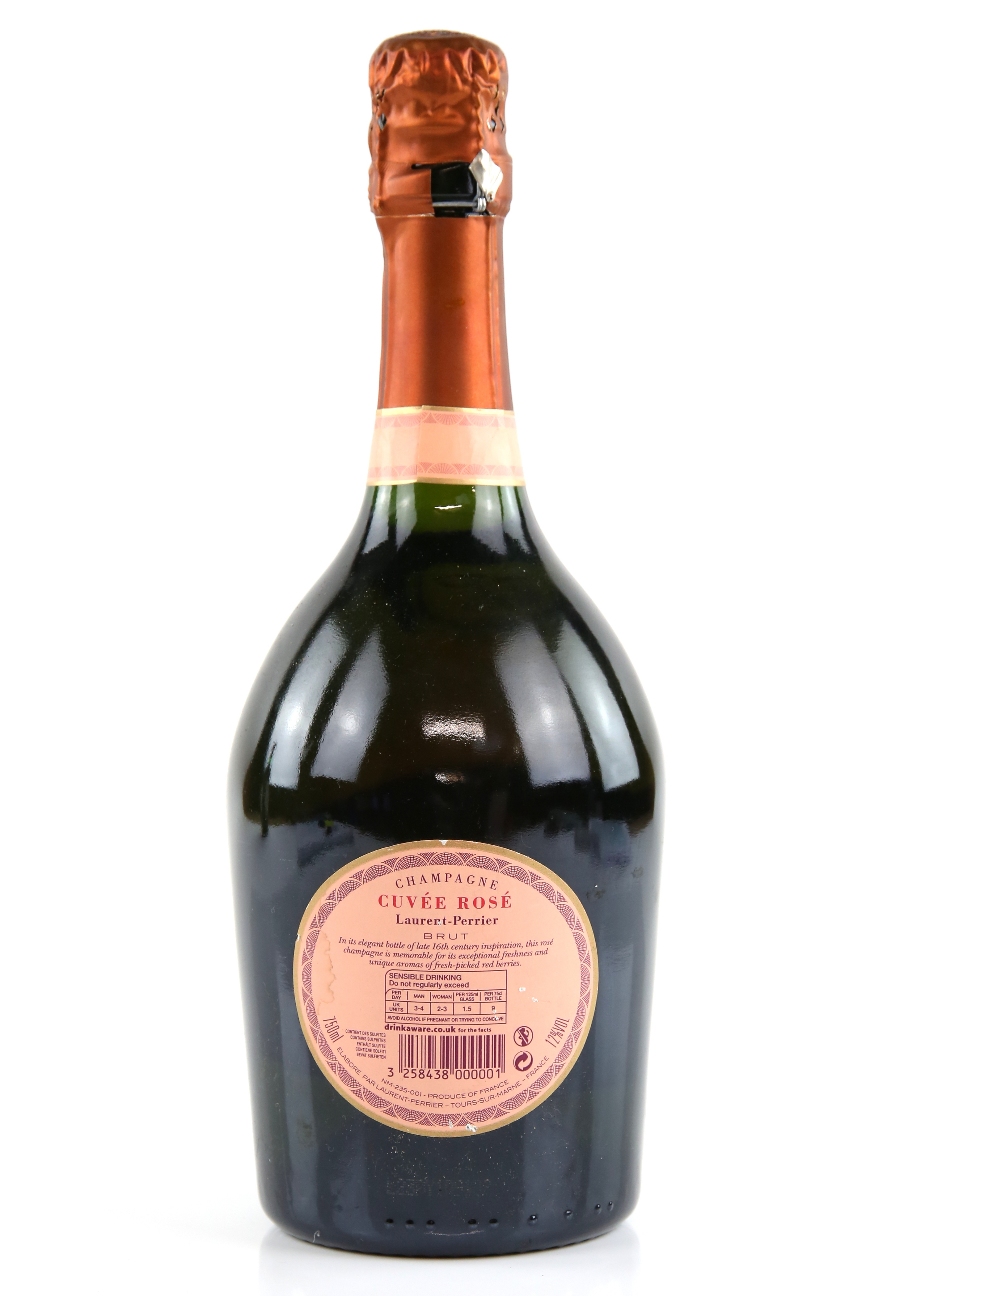 One bottle of Laurent-Perrier Cuvee Rose Champagne, Brut, 750ml - Image 2 of 2